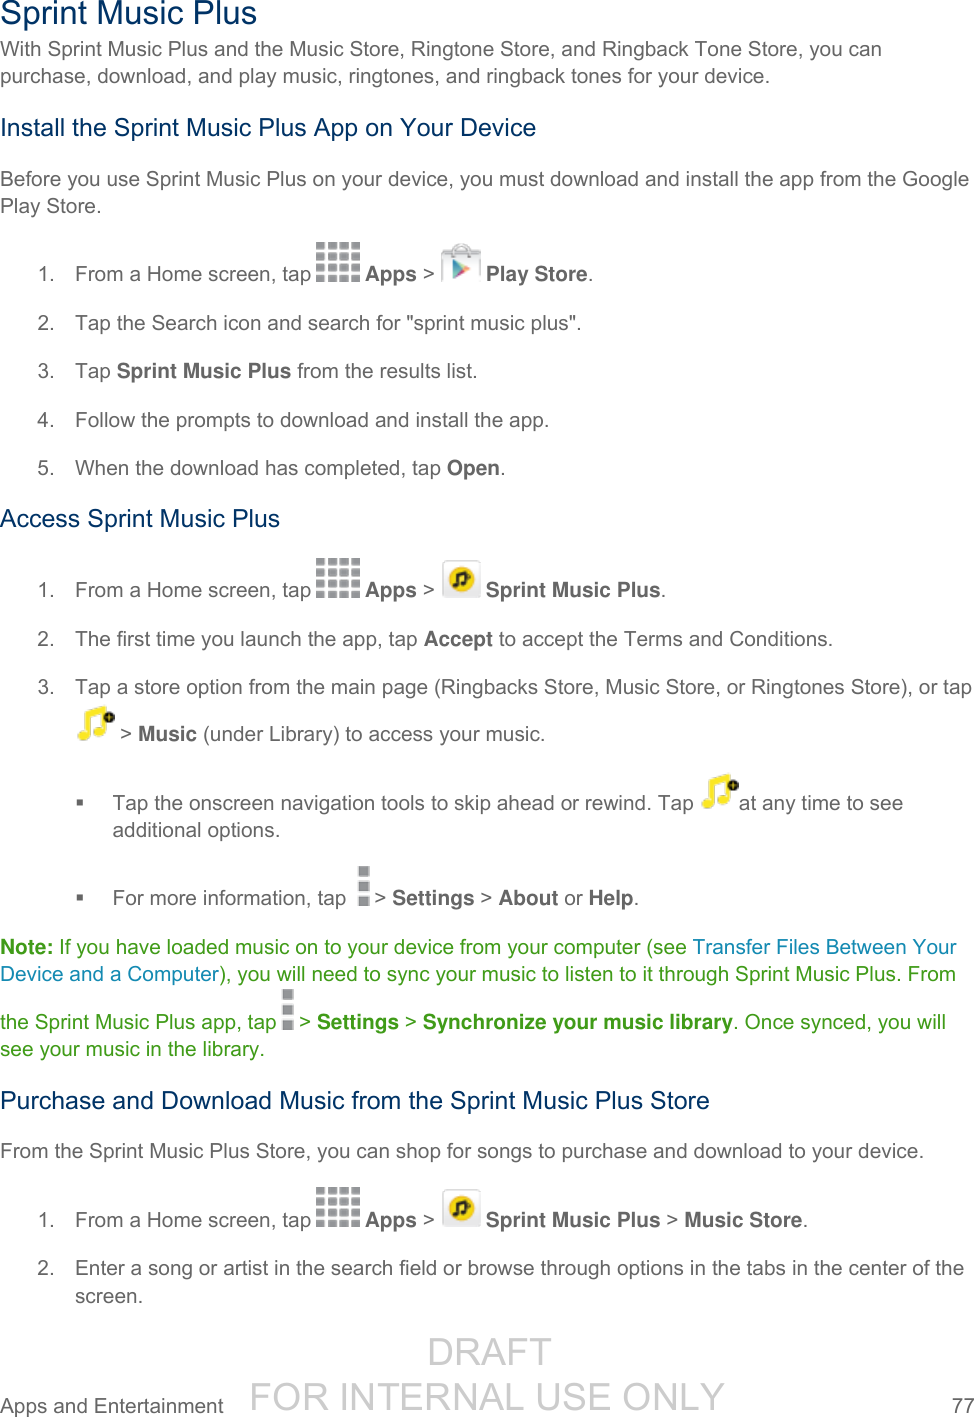                  DRAFT FOR INTERNAL USE ONLY Apps and Entertainment  77   Sprint Music Plus With Sprint Music Plus and the Music Store, Ringtone Store, and Ringback Tone Store, you can purchase, download, and play music, ringtones, and ringback tones for your device.  Install the Sprint Music Plus App on Your Device Before you use Sprint Music Plus on your device, you must download and install the app from the Google Play Store. 1.  From a Home screen, tap   Apps &gt;   Play Store. 2.  Tap the Search icon and search for &quot;sprint music plus&quot;. 3.  Tap Sprint Music Plus from the results list. 4.  Follow the prompts to download and install the app. 5.  When the download has completed, tap Open. Access Sprint Music Plus 1.  From a Home screen, tap   Apps &gt;   Sprint Music Plus. 2.  The first time you launch the app, tap Accept to accept the Terms and Conditions. 3.  Tap a store option from the main page (Ringbacks Store, Music Store, or Ringtones Store), or tap  &gt; Music (under Library) to access your music.   Tap the onscreen navigation tools to skip ahead or rewind. Tap  at any time to see additional options.    For more information, tap  &gt; Settings &gt; About or Help.  Note: If you have loaded music on to your device from your computer (see Transfer Files Between Your Device and a Computer), you will need to sync your music to listen to it through Sprint Music Plus. From the Sprint Music Plus app, tap &gt; Settings &gt; Synchronize your music library. Once synced, you will see your music in the library. Purchase and Download Music from the Sprint Music Plus Store From the Sprint Music Plus Store, you can shop for songs to purchase and download to your device. 1.  From a Home screen, tap   Apps &gt;   Sprint Music Plus &gt; Music Store. 2.  Enter a song or artist in the search field or browse through options in the tabs in the center of the screen. 